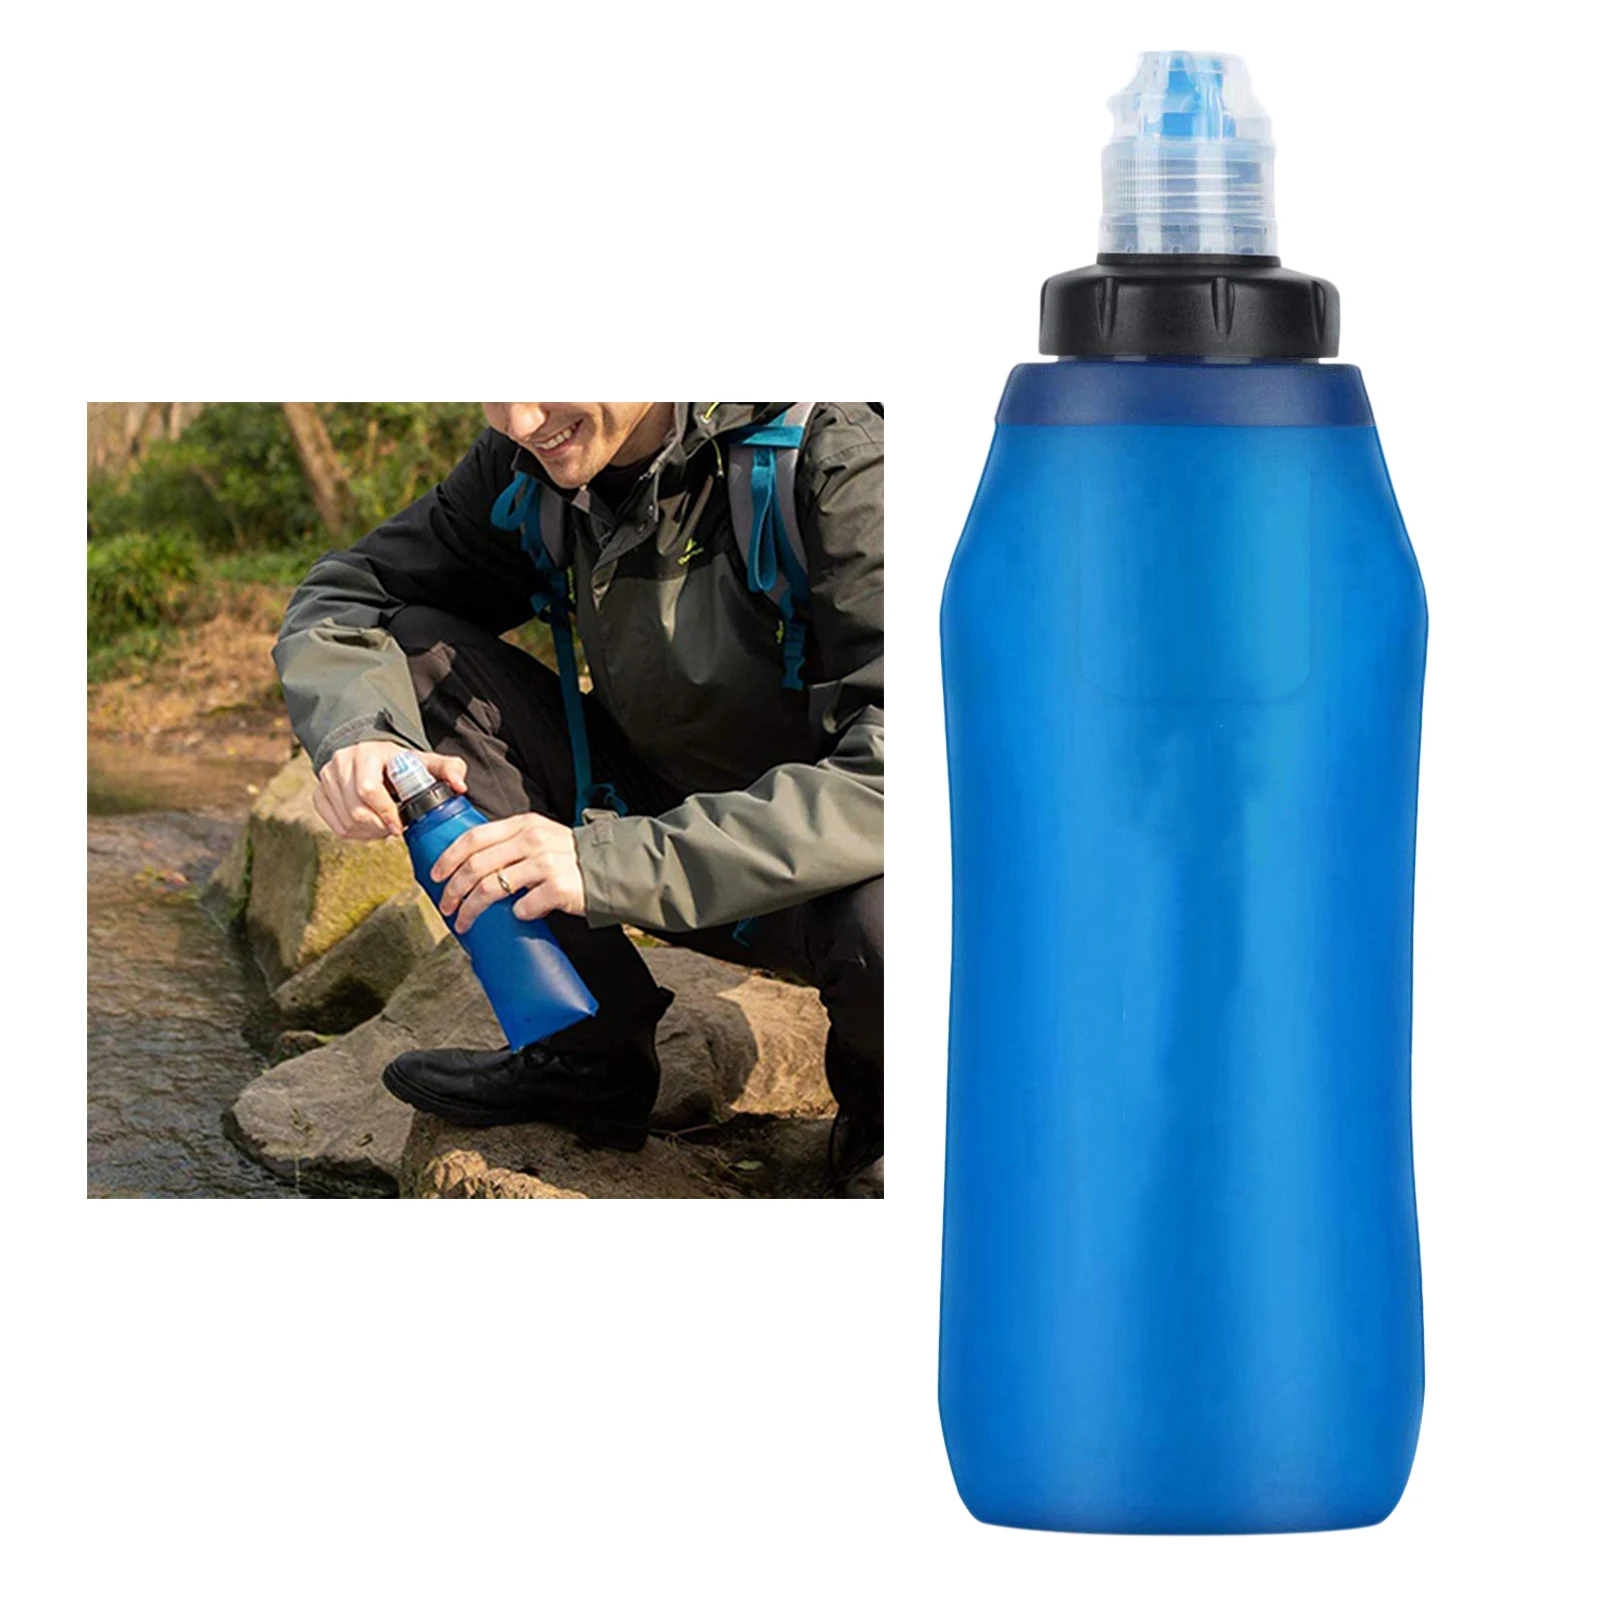 Outdoor Survival Water Filter Bottle Purifier Filtration Emergency Camping